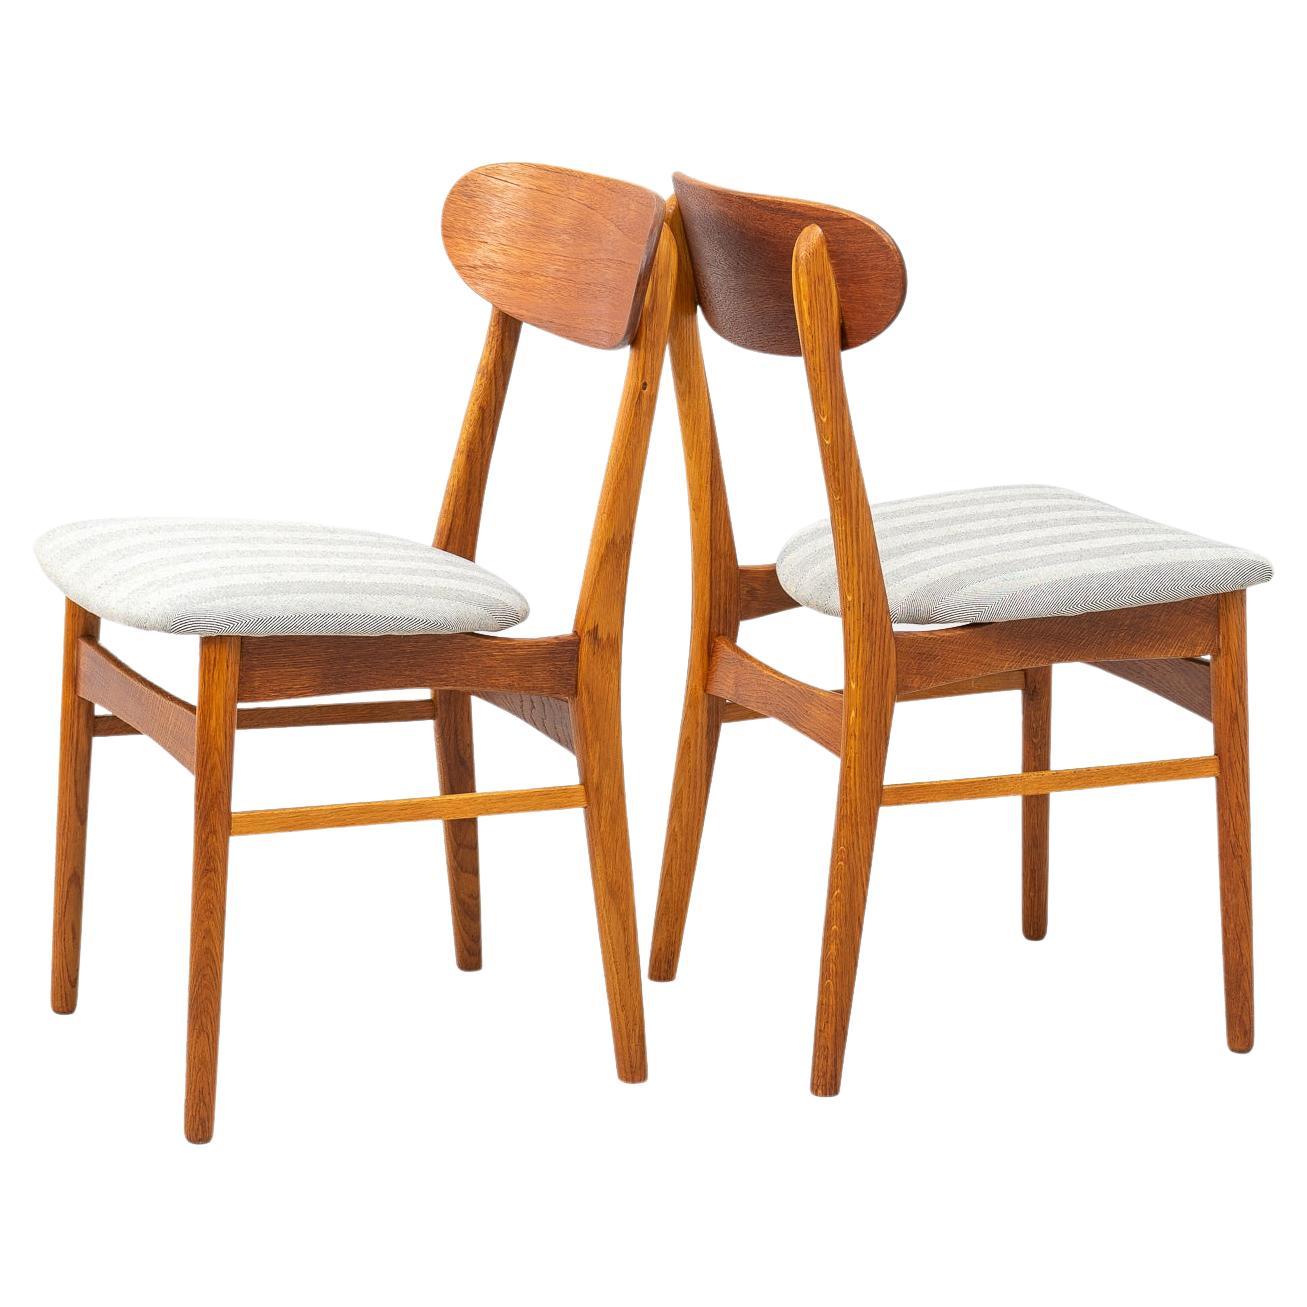 Pair of Danish Chairs Made of Teak, circa 1960 For Sale